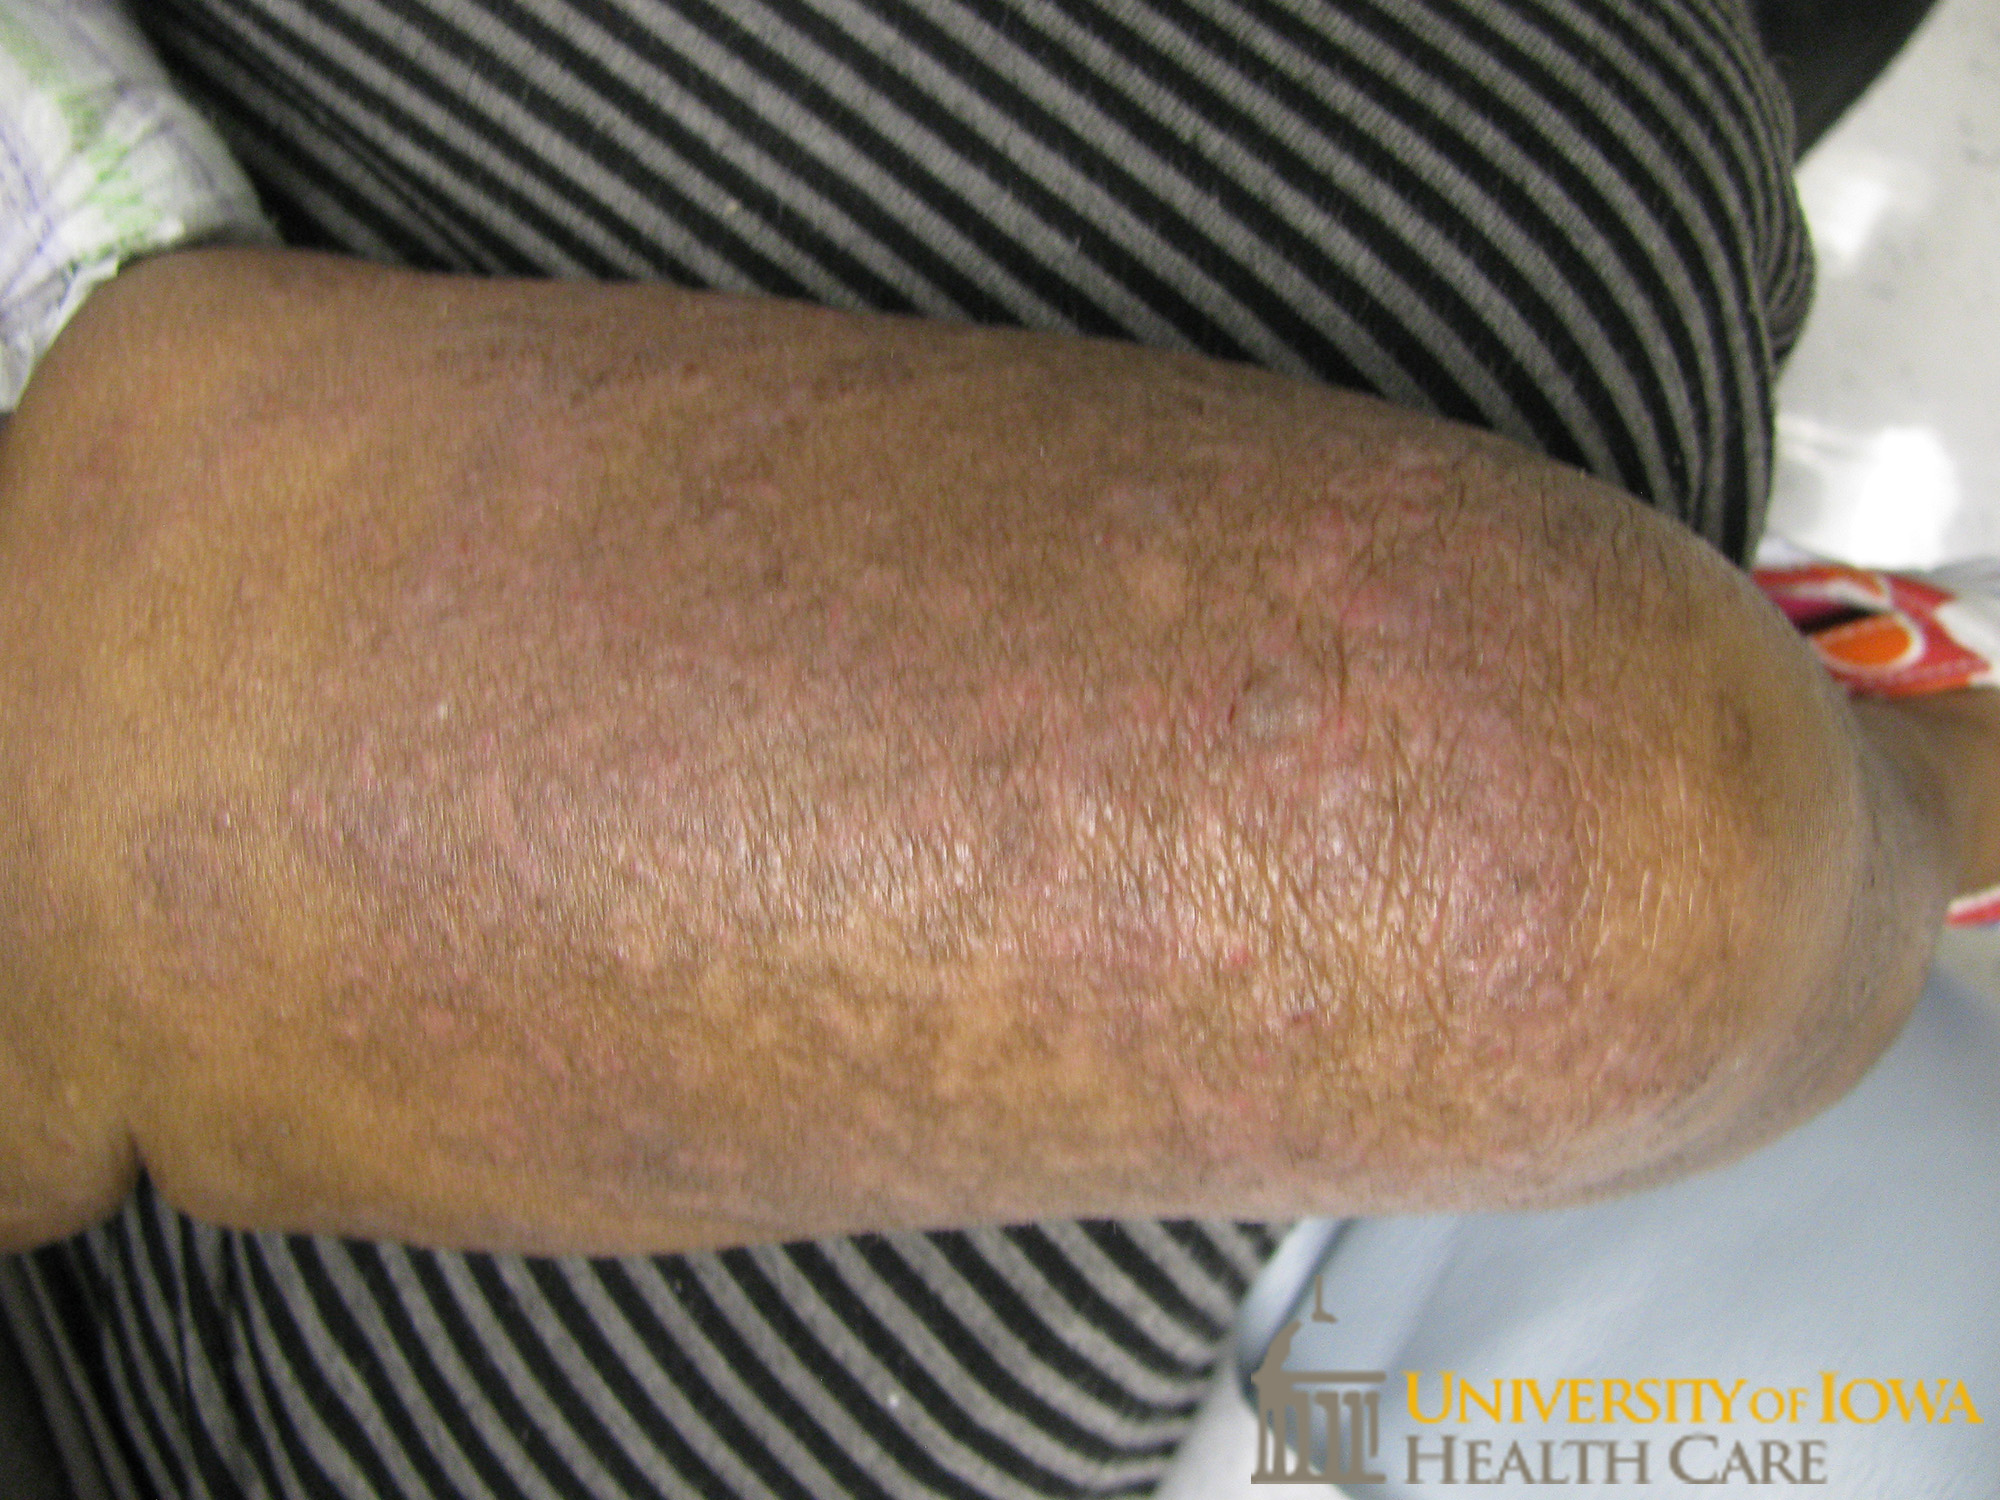 Hyperpigmented to erythematous lichenified scaly plaques on the lower legs. (click images for higher resolution).